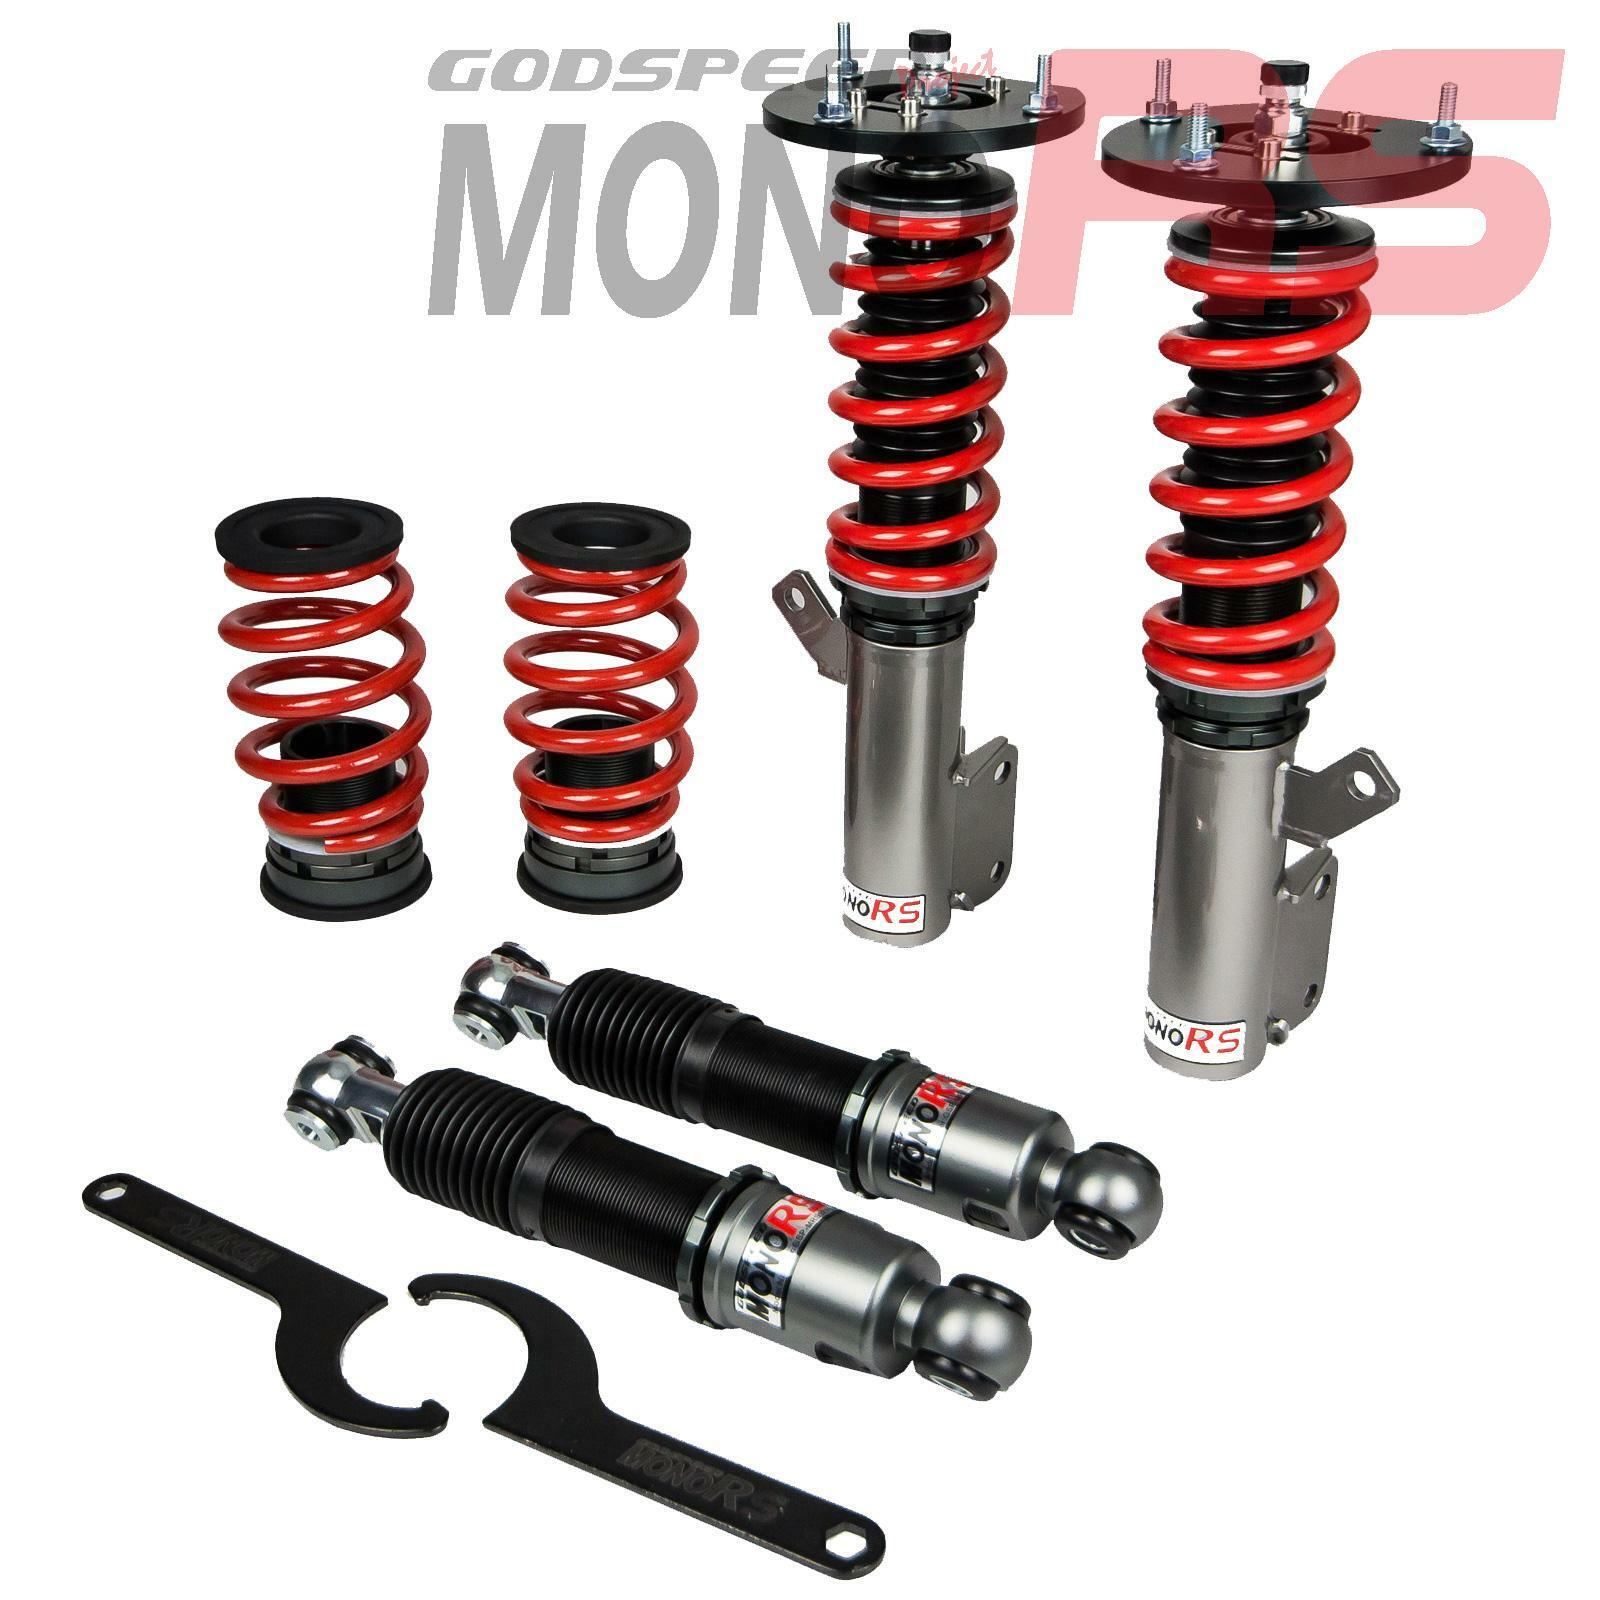 Godspeed made for Chevrolet HHR 2006-11 MonoRS Coilovers MRS1770-C